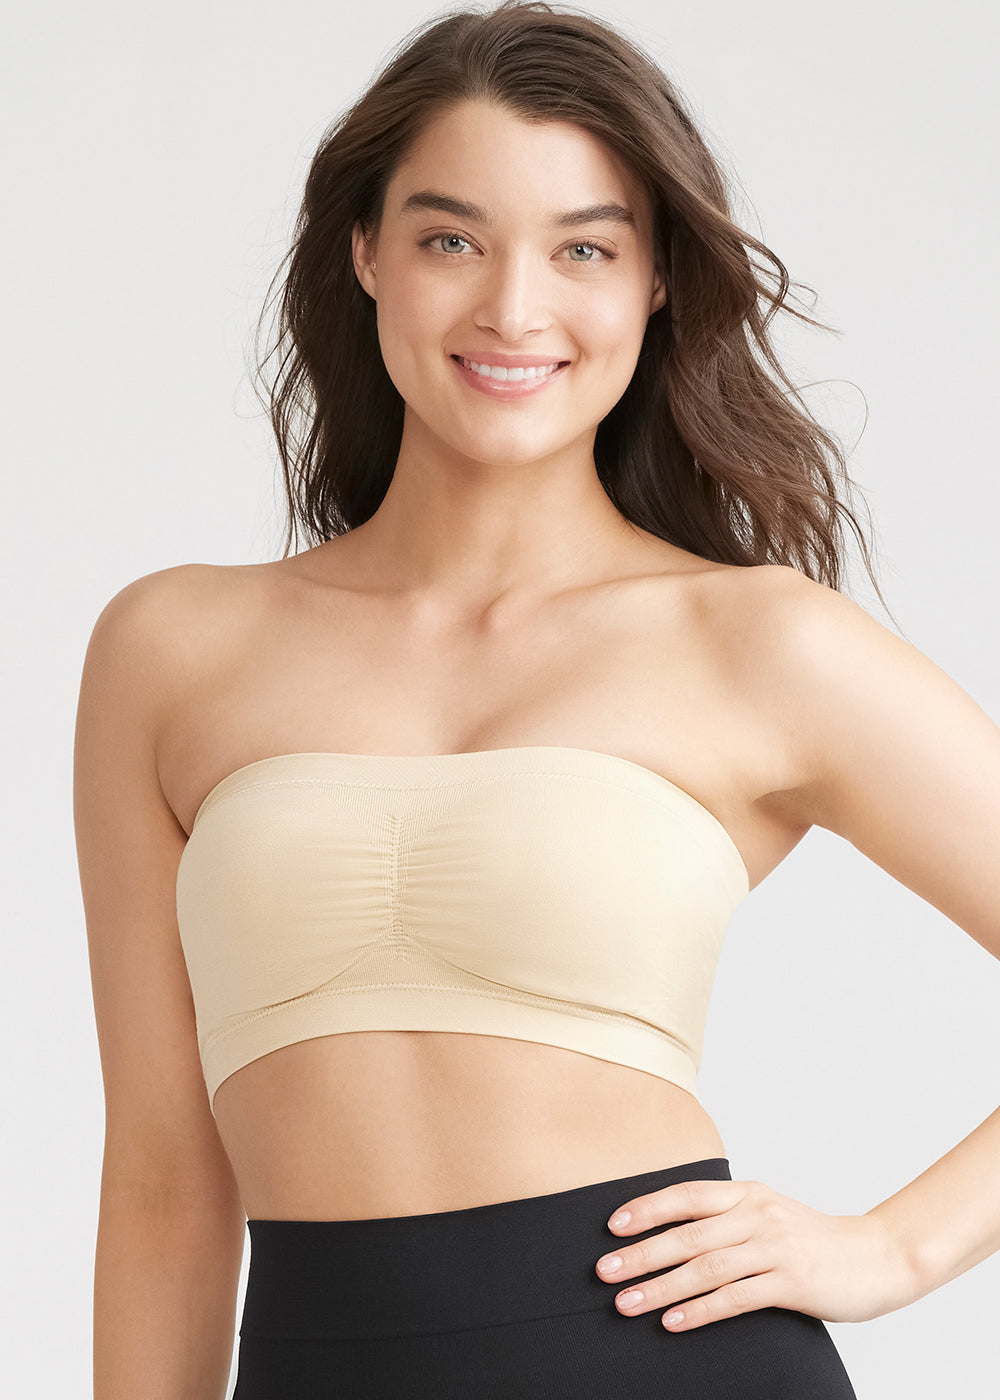 Bandeau Bra - Seamless from Yummie in Frappe  - 1